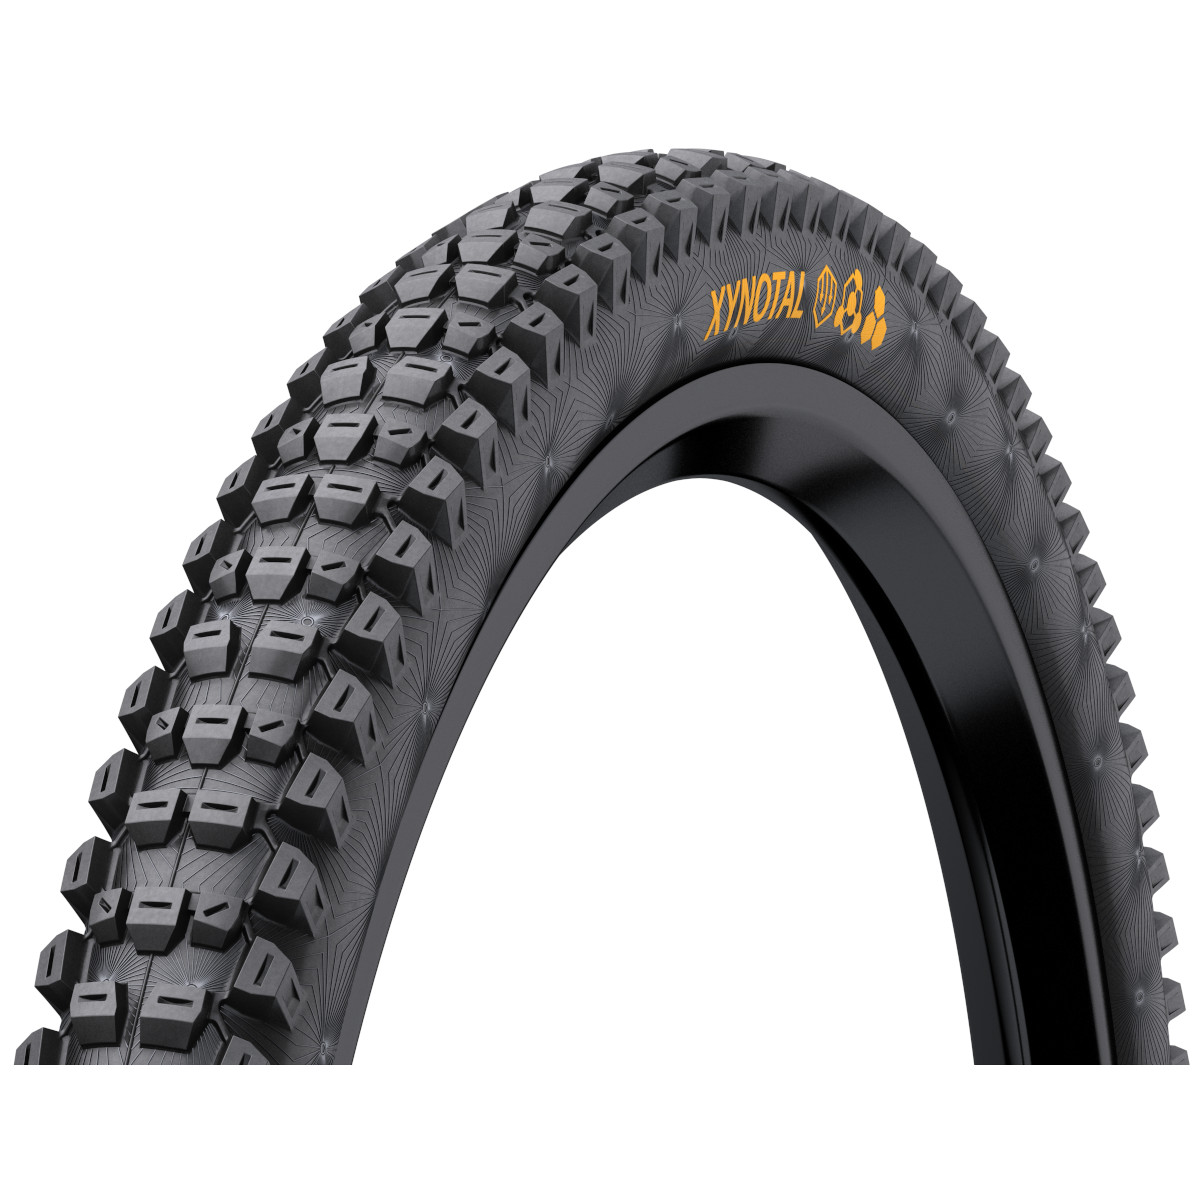 Image of Continental Xynotal - Downhill Soft - MTB Folding Tire - 27.5x2.40"